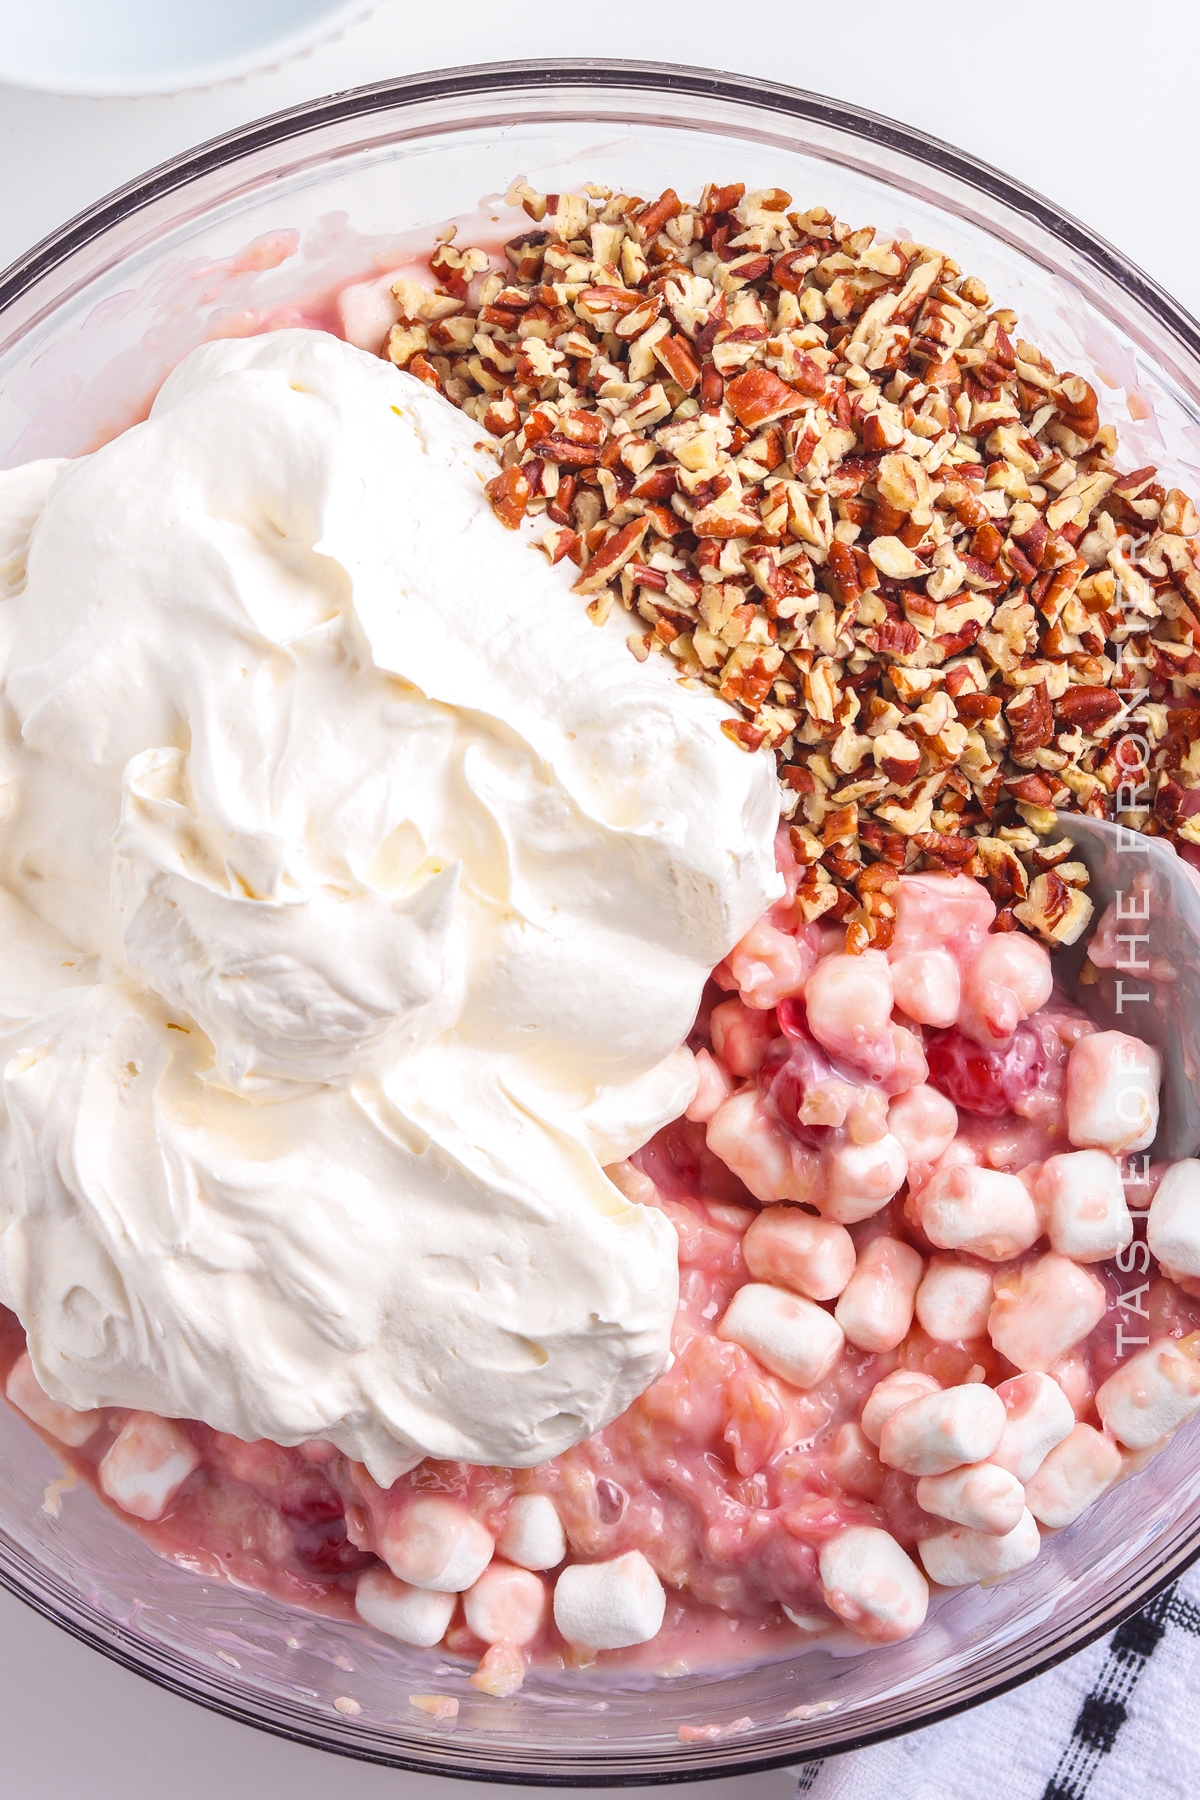 whipped cream, nuts and marshmallows